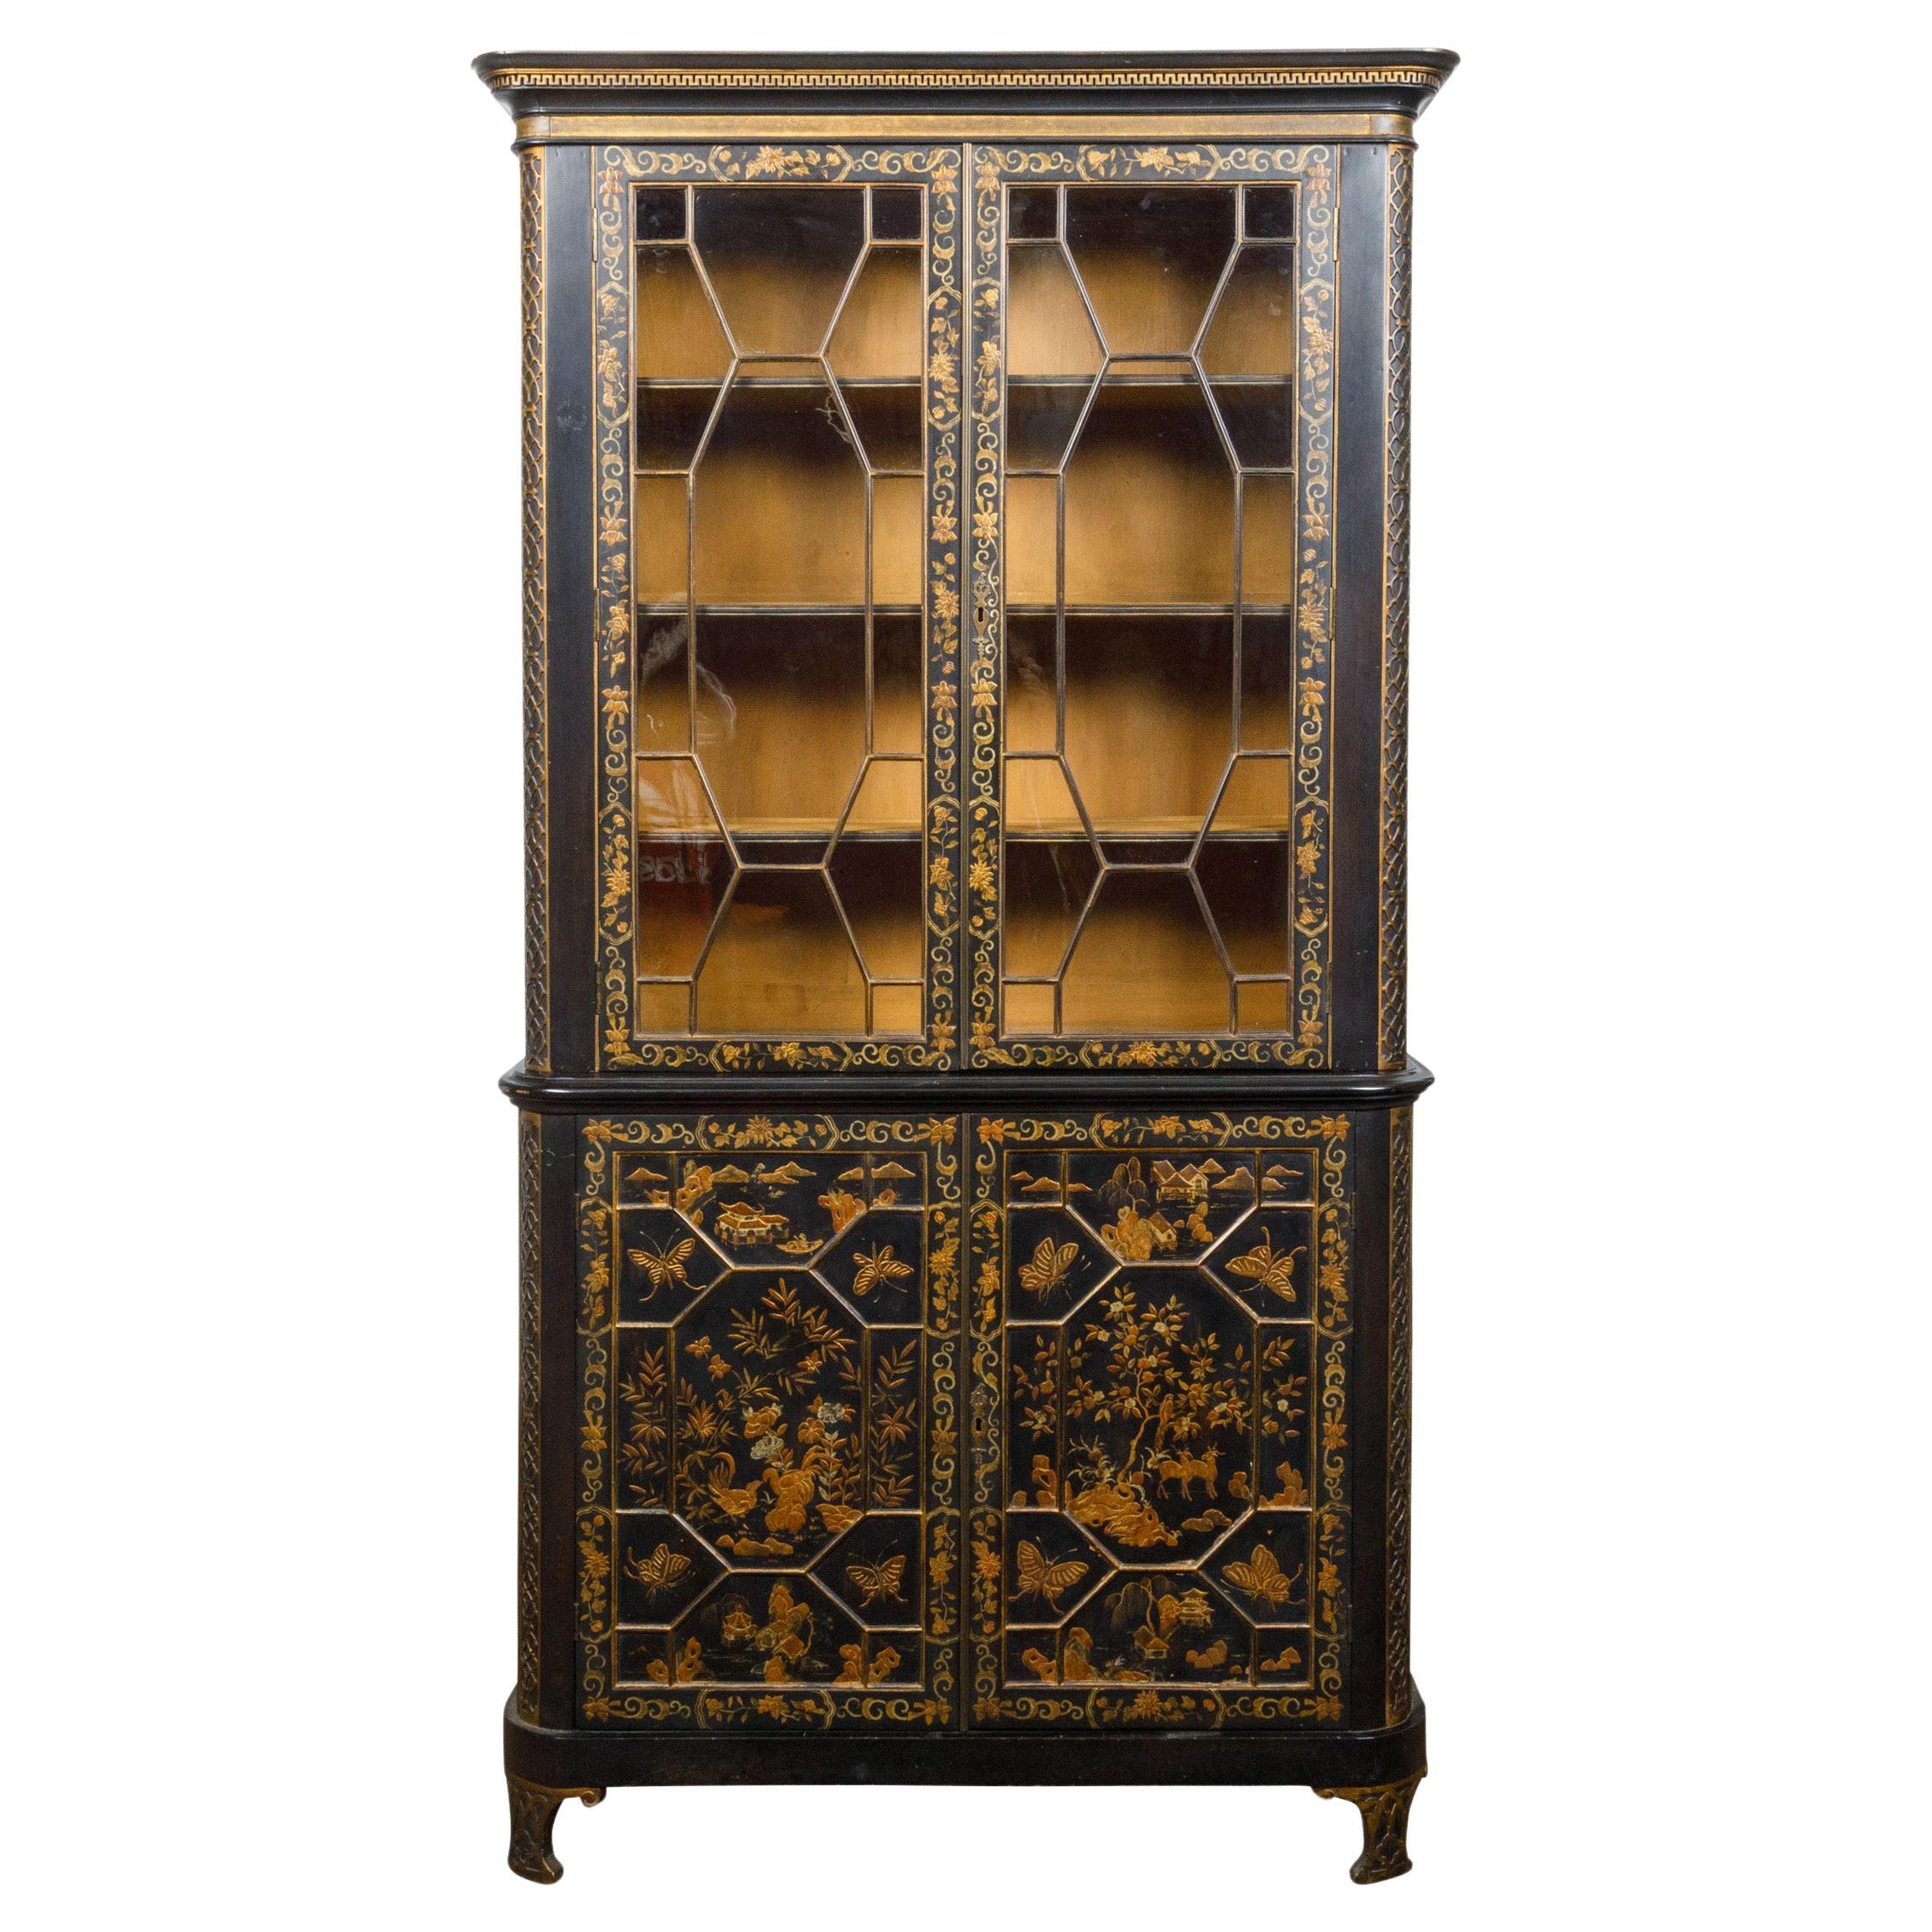 19th Century English Black and Gold Chinoiserie Bookcase with Glass Doors